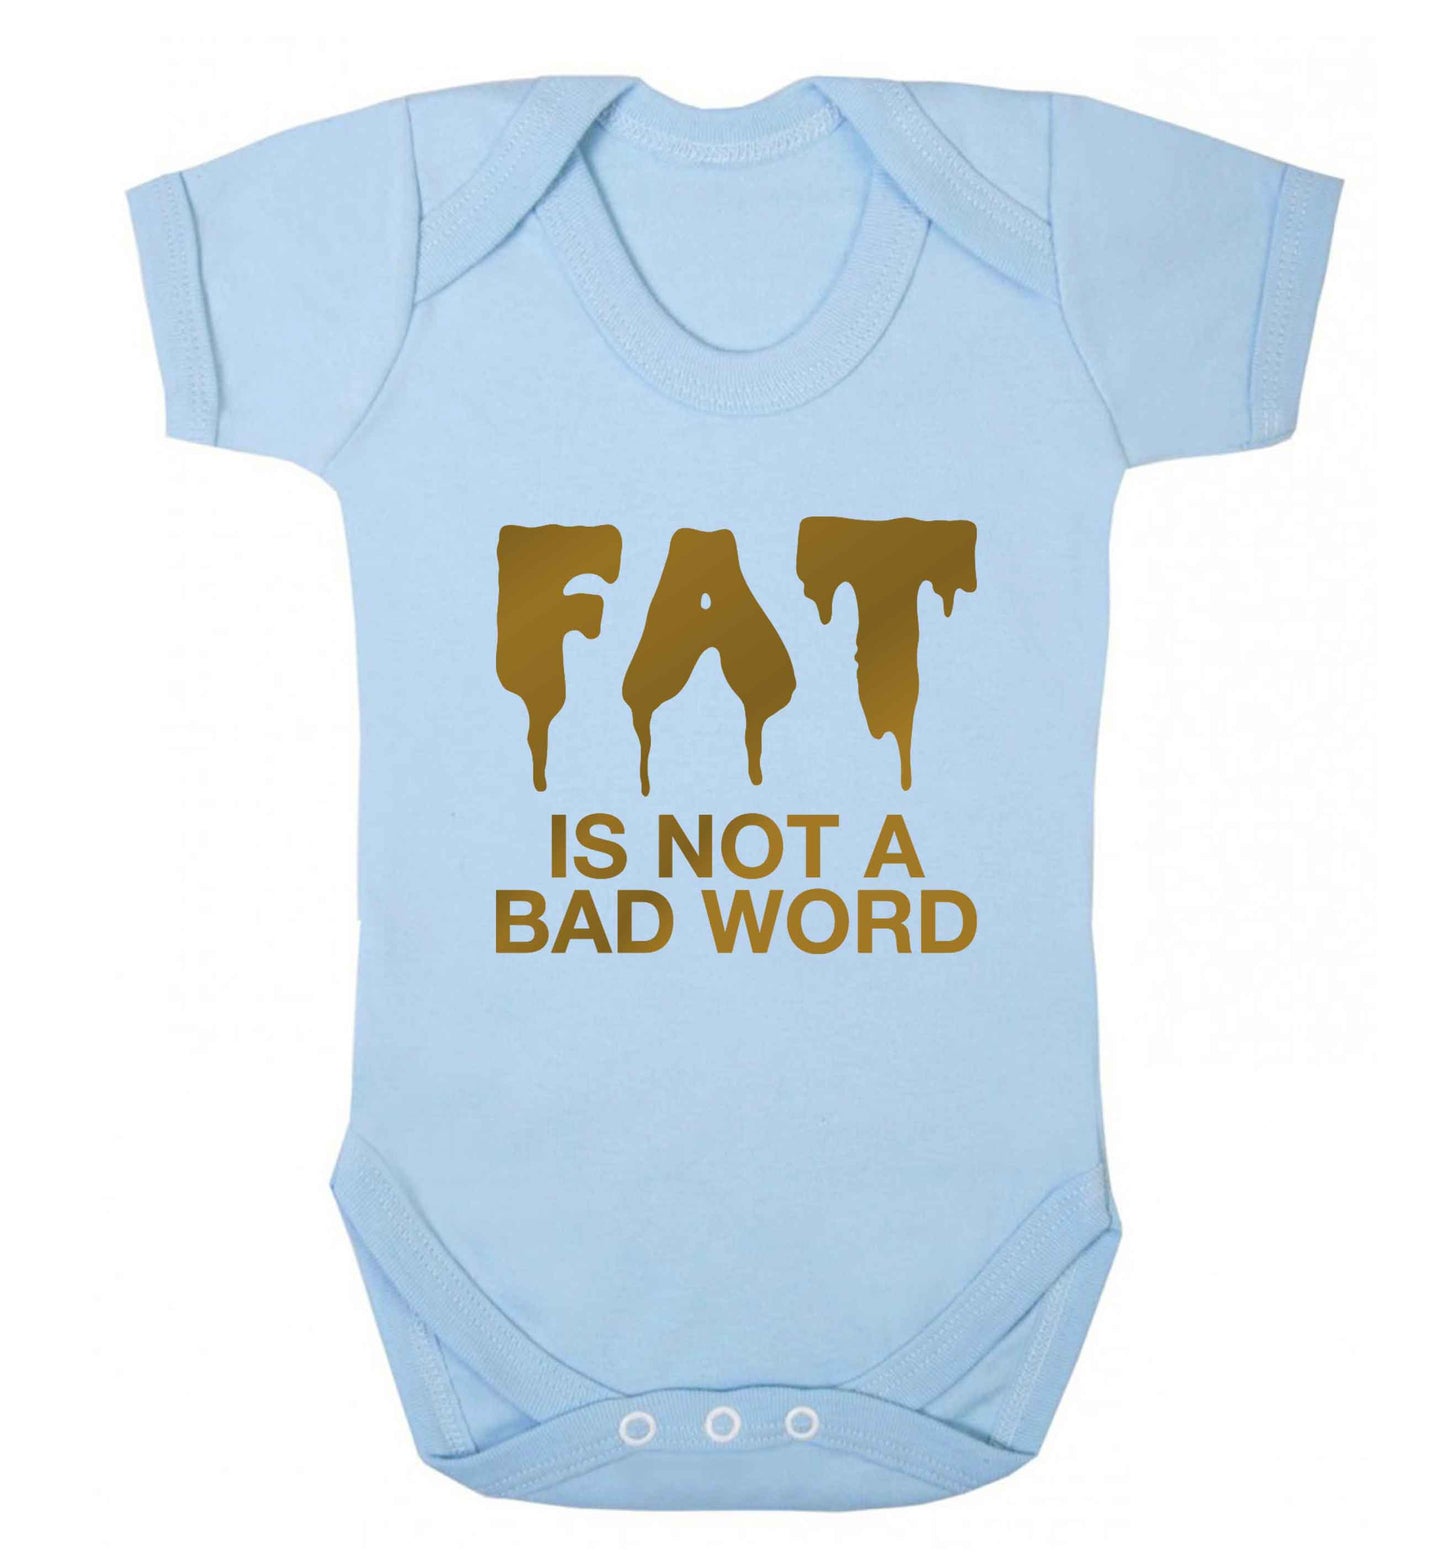 Fat is not a bad word baby vest pale blue 18-24 months